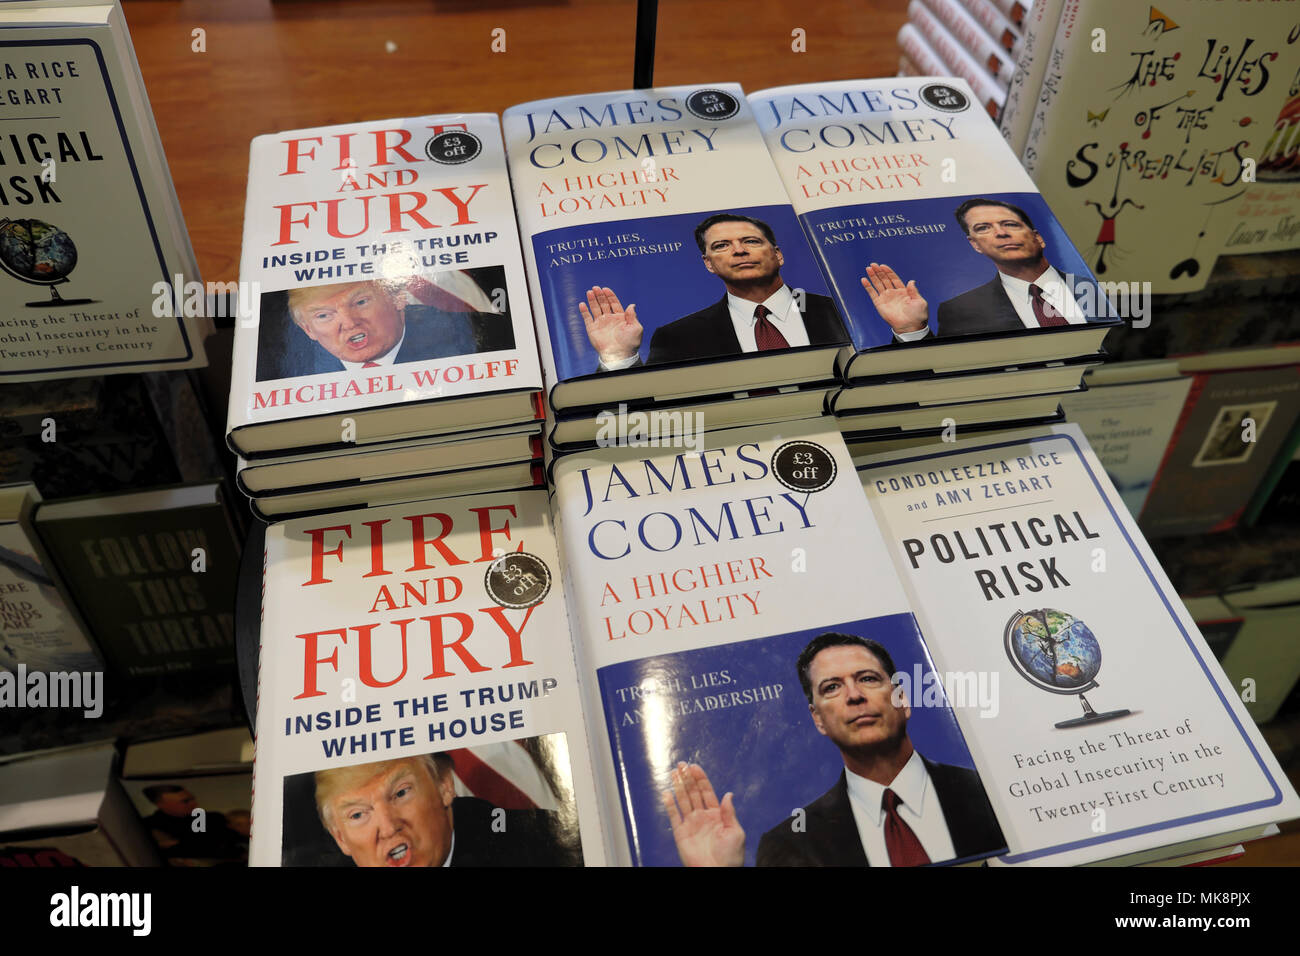 'Fire and Fury' Michael Wolfe book and 'A Higher Loyalty' James Comey books focussing on Donald Trump behaviour for sale in bookstore UK  KATHY DEWITT Stock Photo